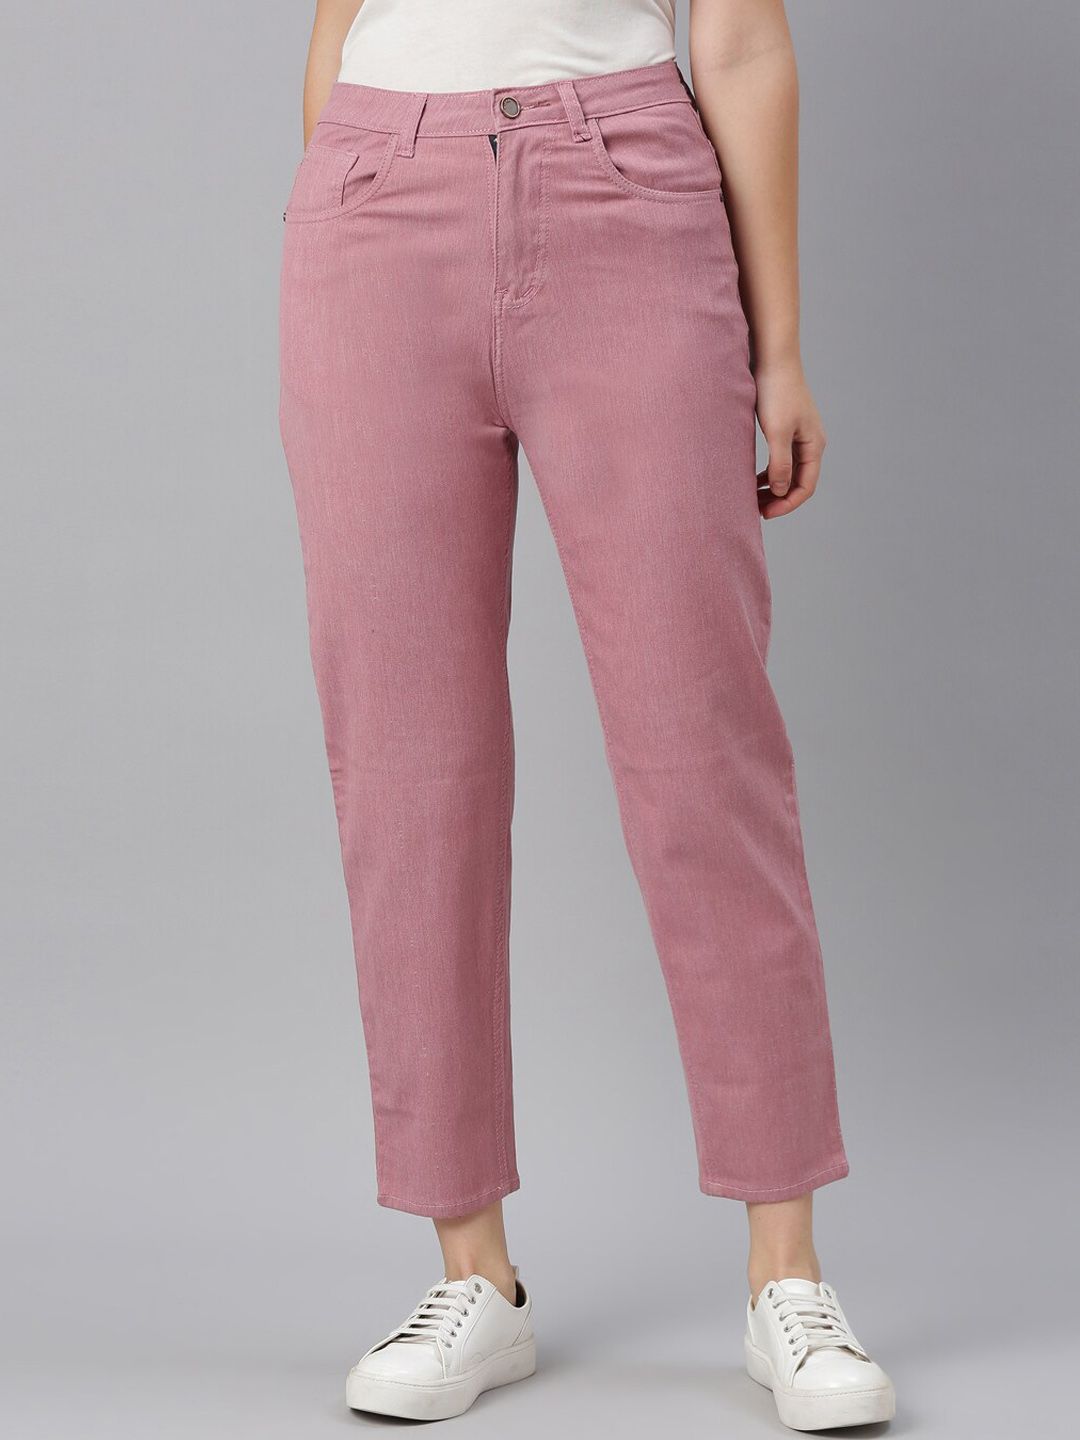 ZHEIA Women Pink Relaxed Fit High-Rise Stretchable Crop Jeans Price in India